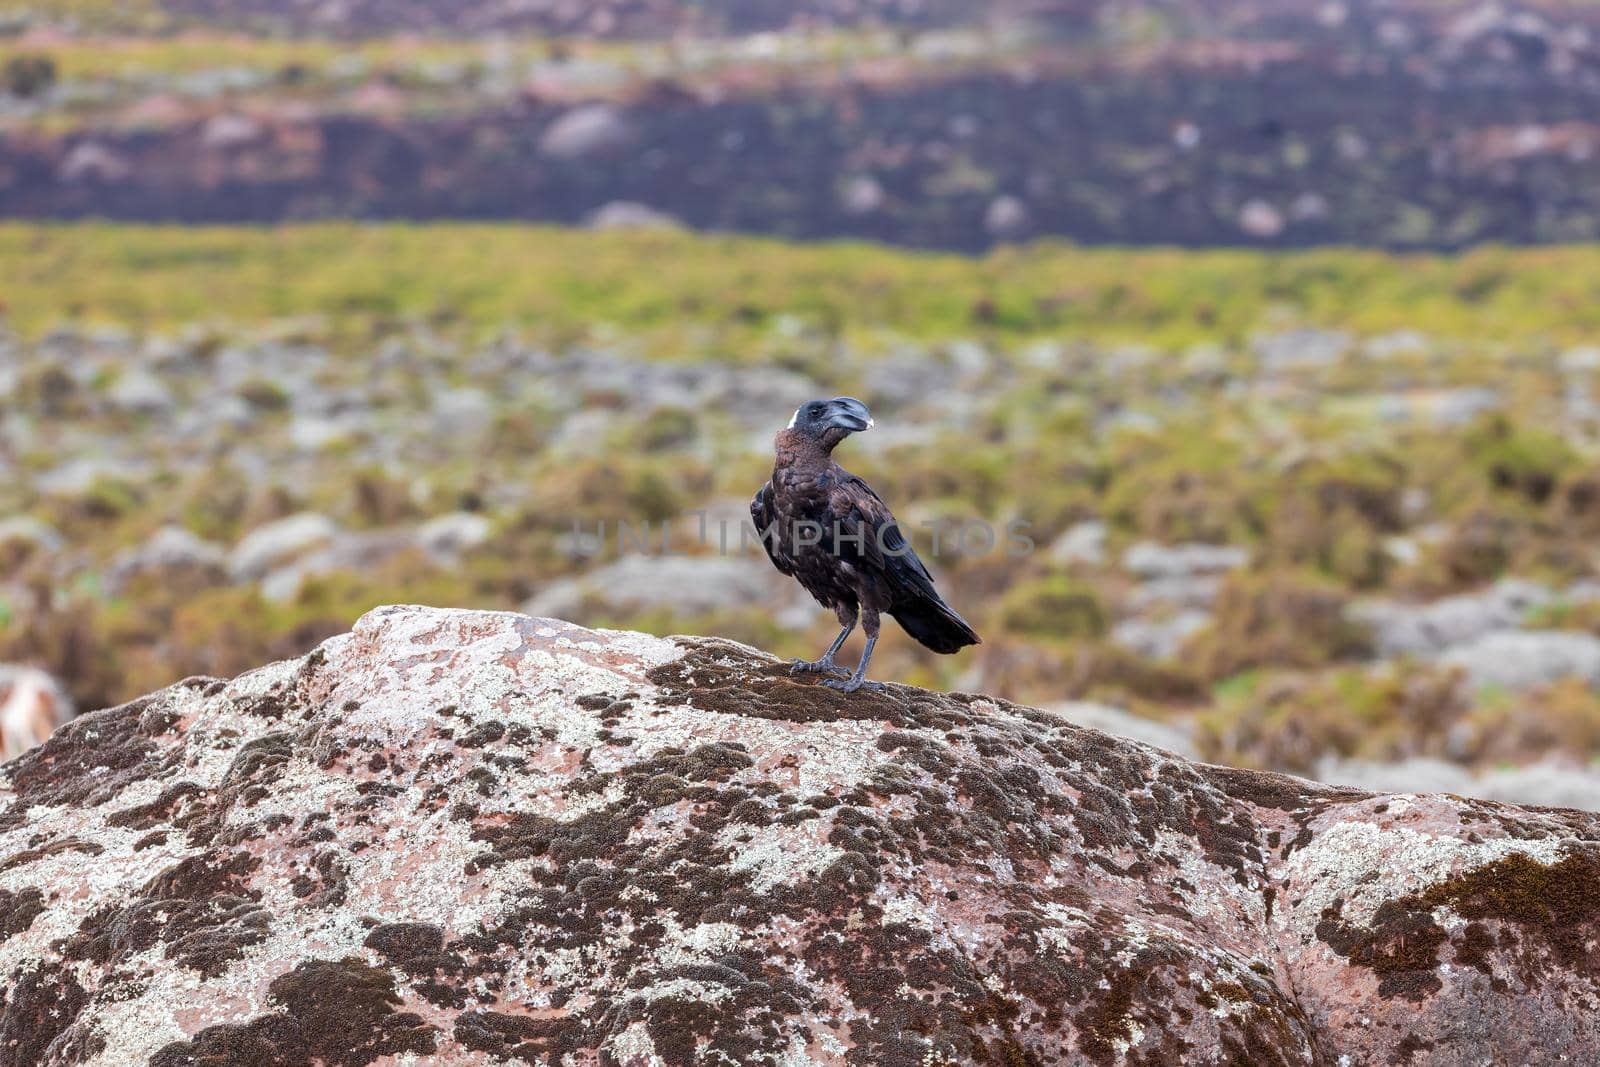 big black bird Thick-billed raven sits on a rock in natural habitat in Bale mountains, Ethiopia wildlife, Africa